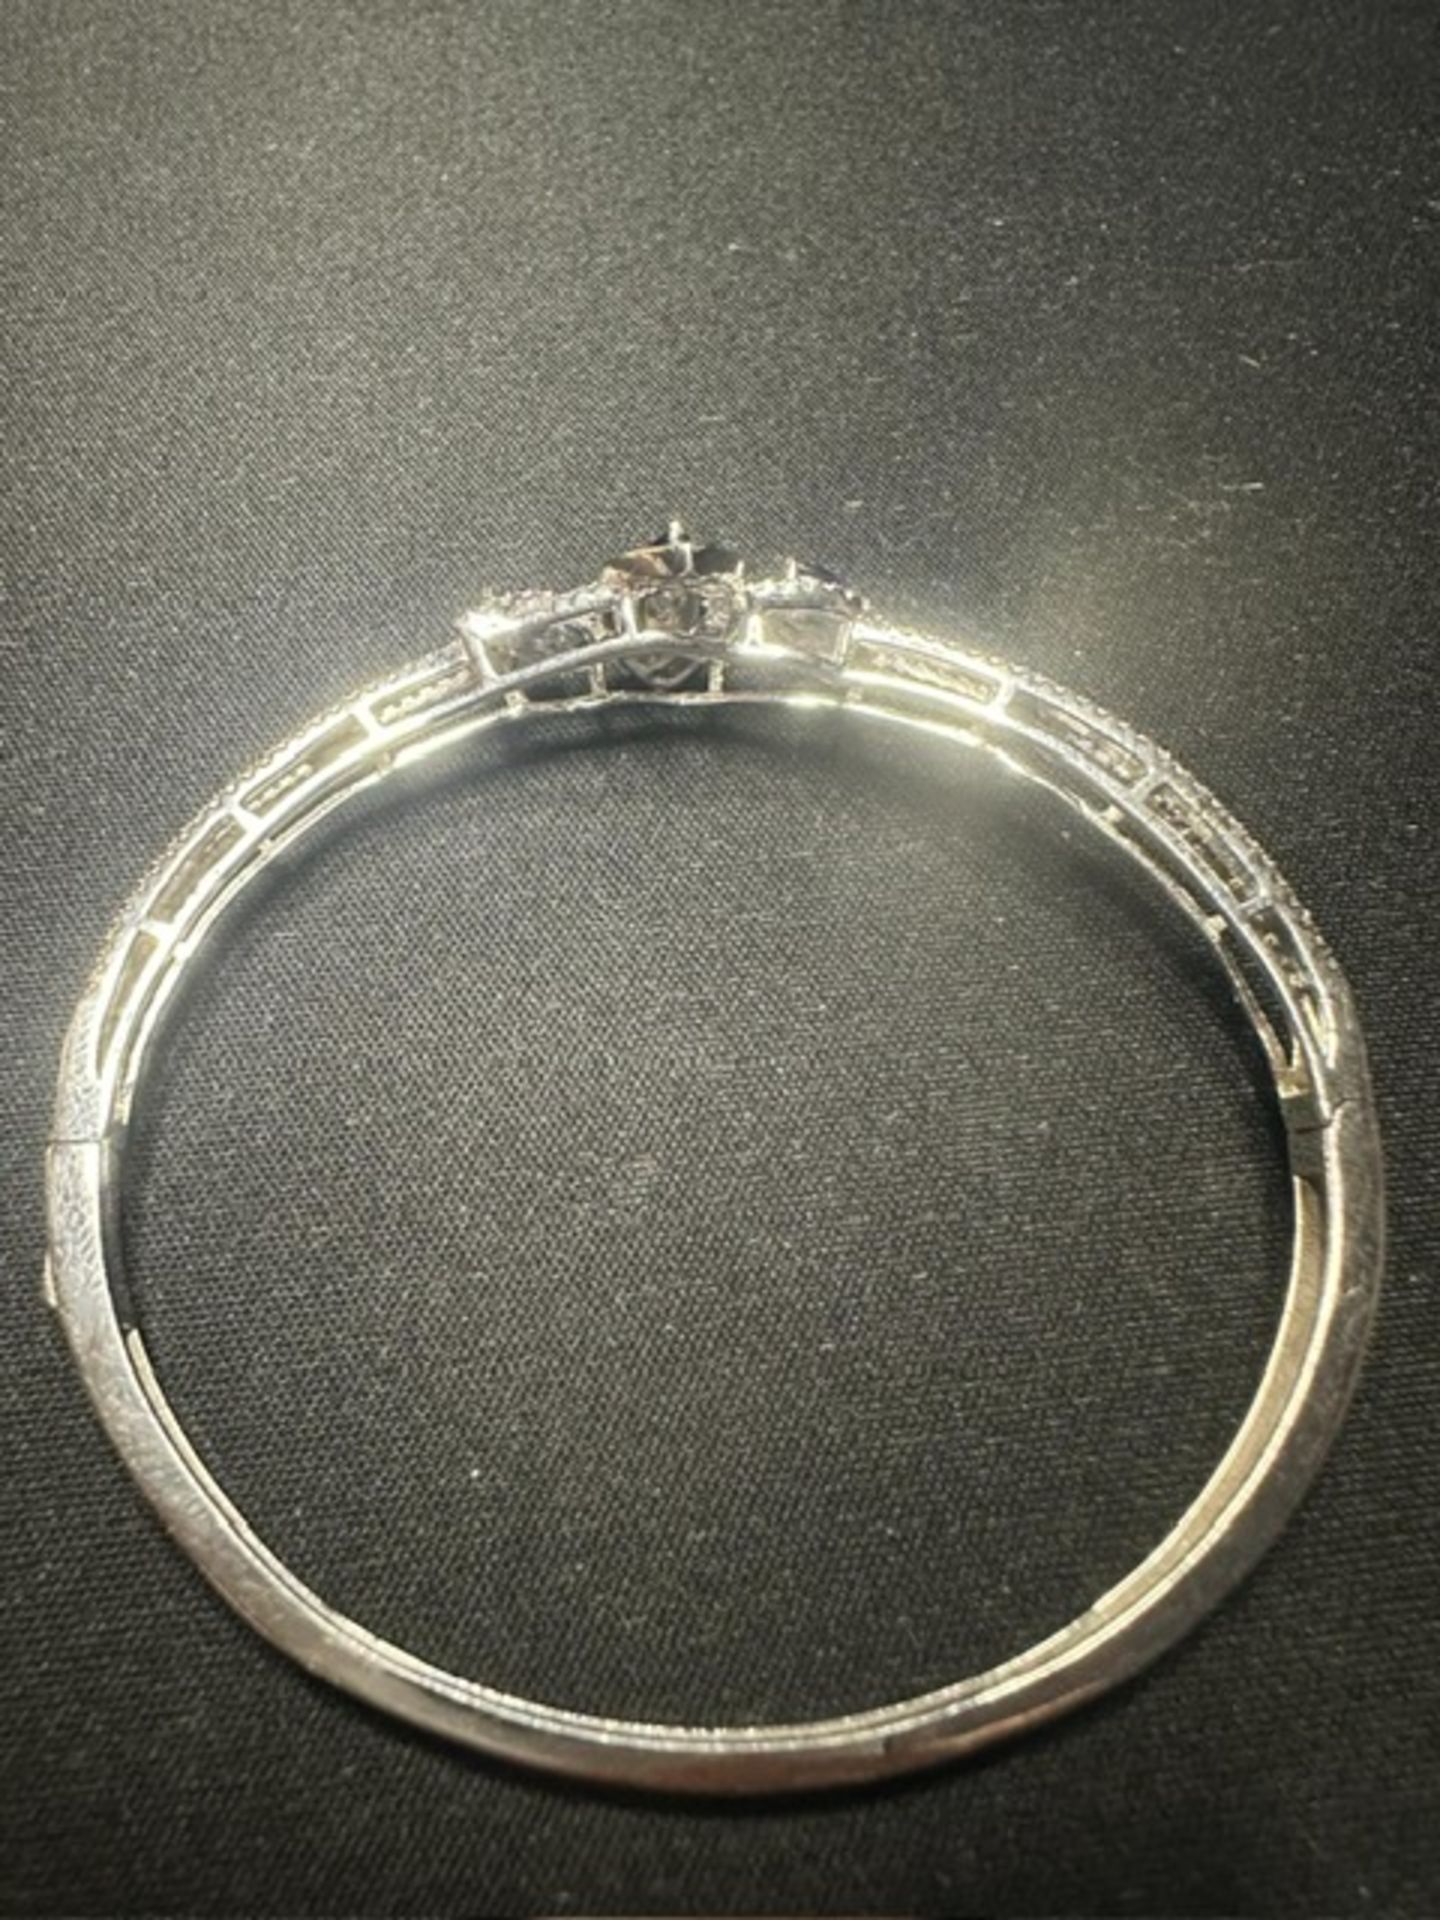 Designer Serling Silver Crystal Embedded Bangle with 3 synthetic Sapphires - Image 2 of 2